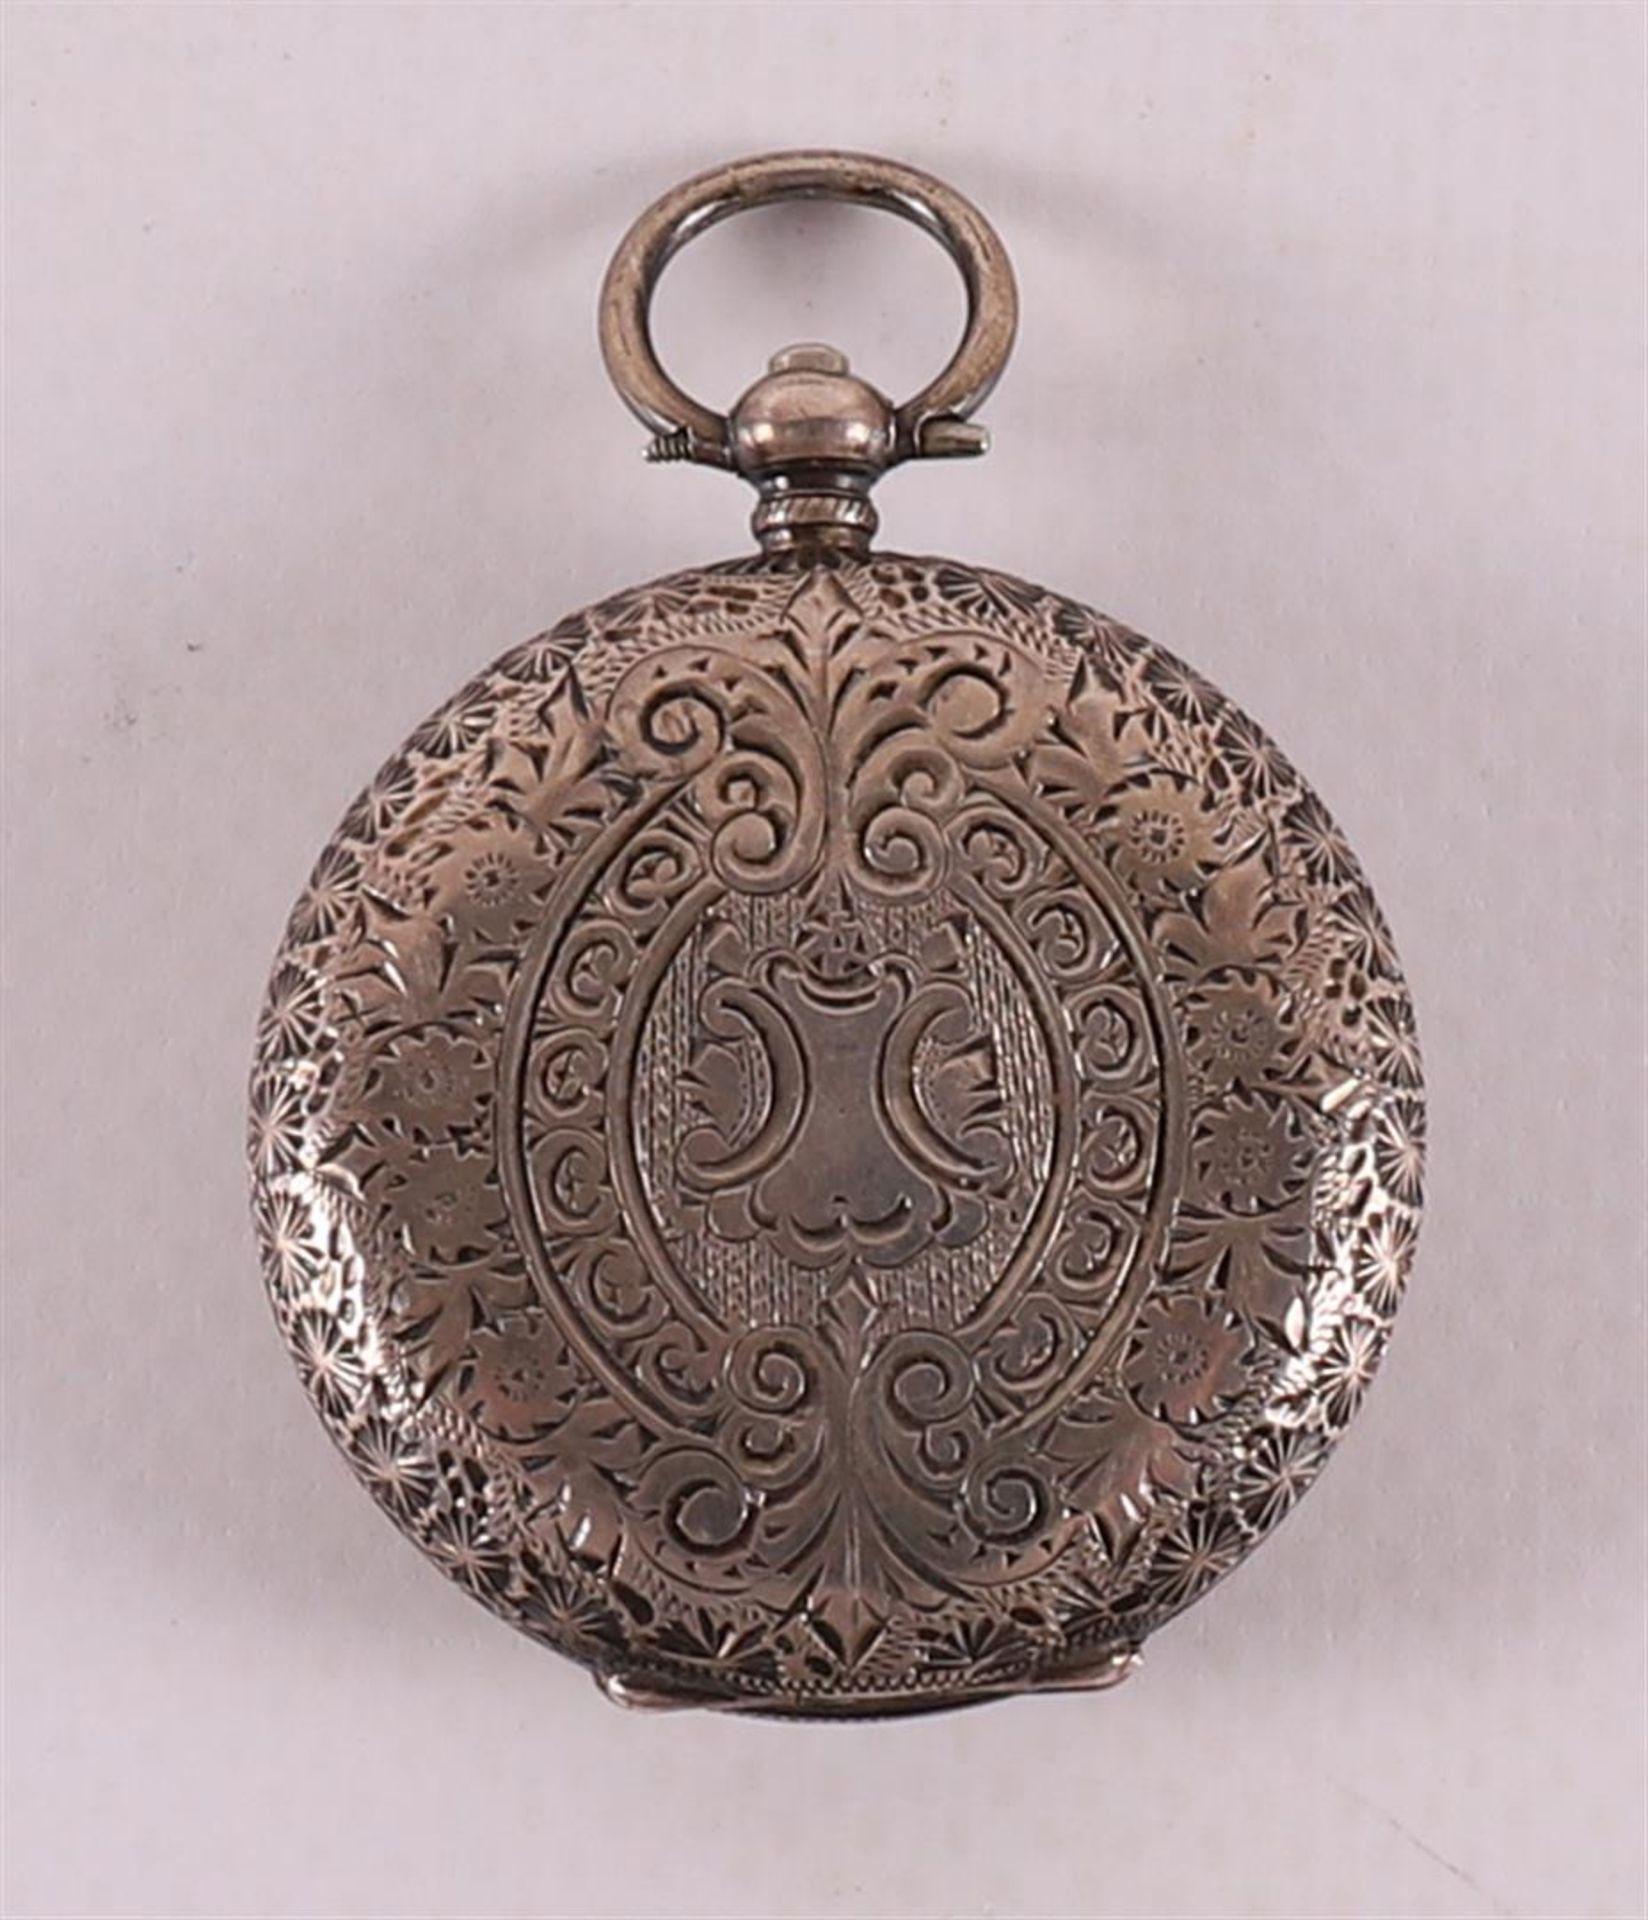 Two various men's vest pocket watches in silver cases, around 1900 - Image 5 of 5